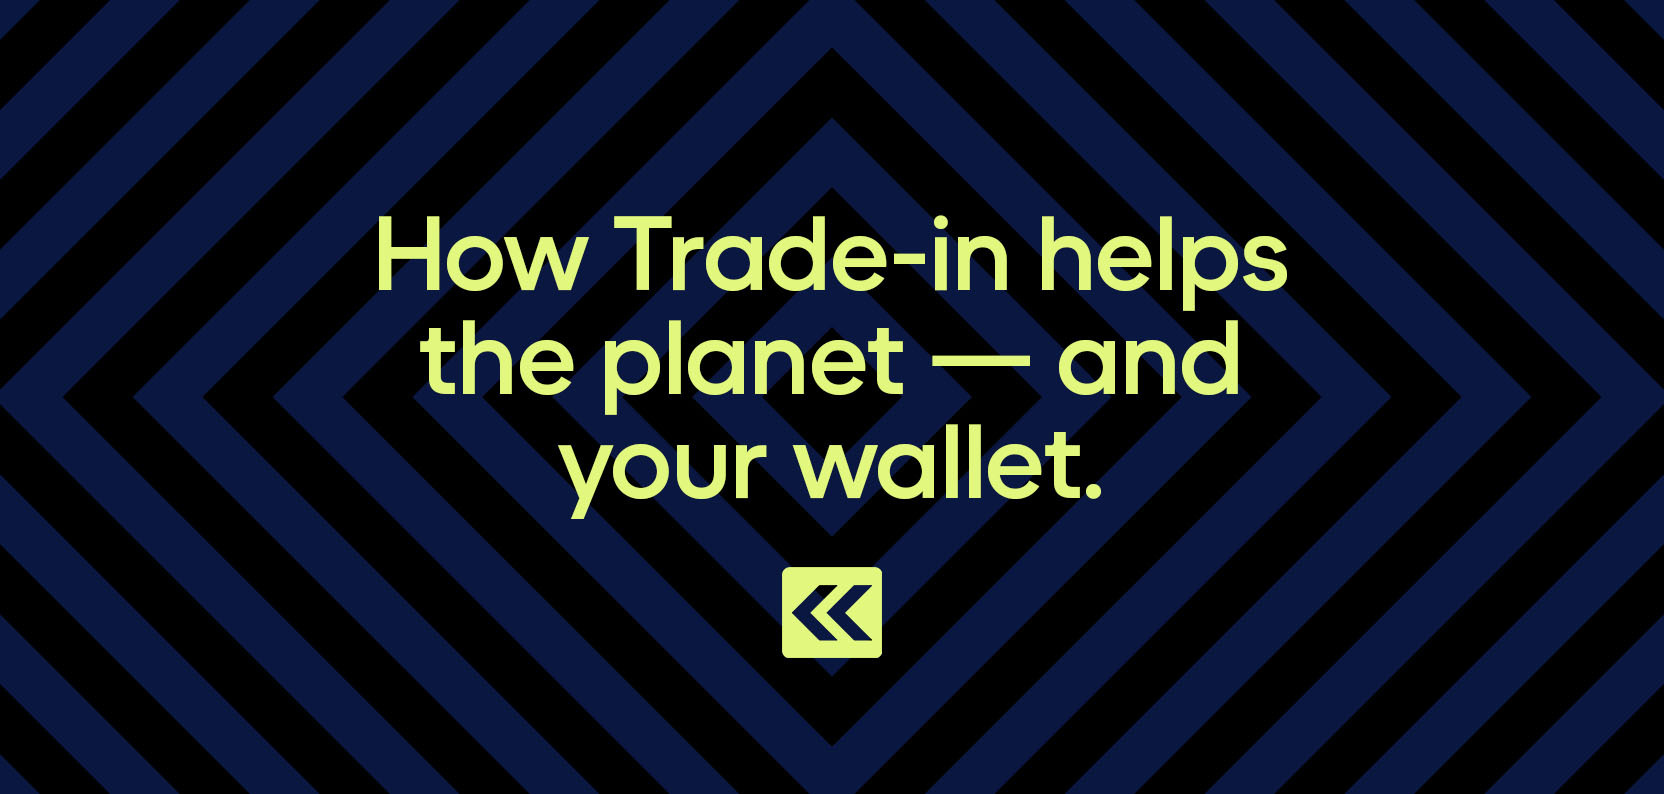 How Trade-in helps the planet — and your wallet